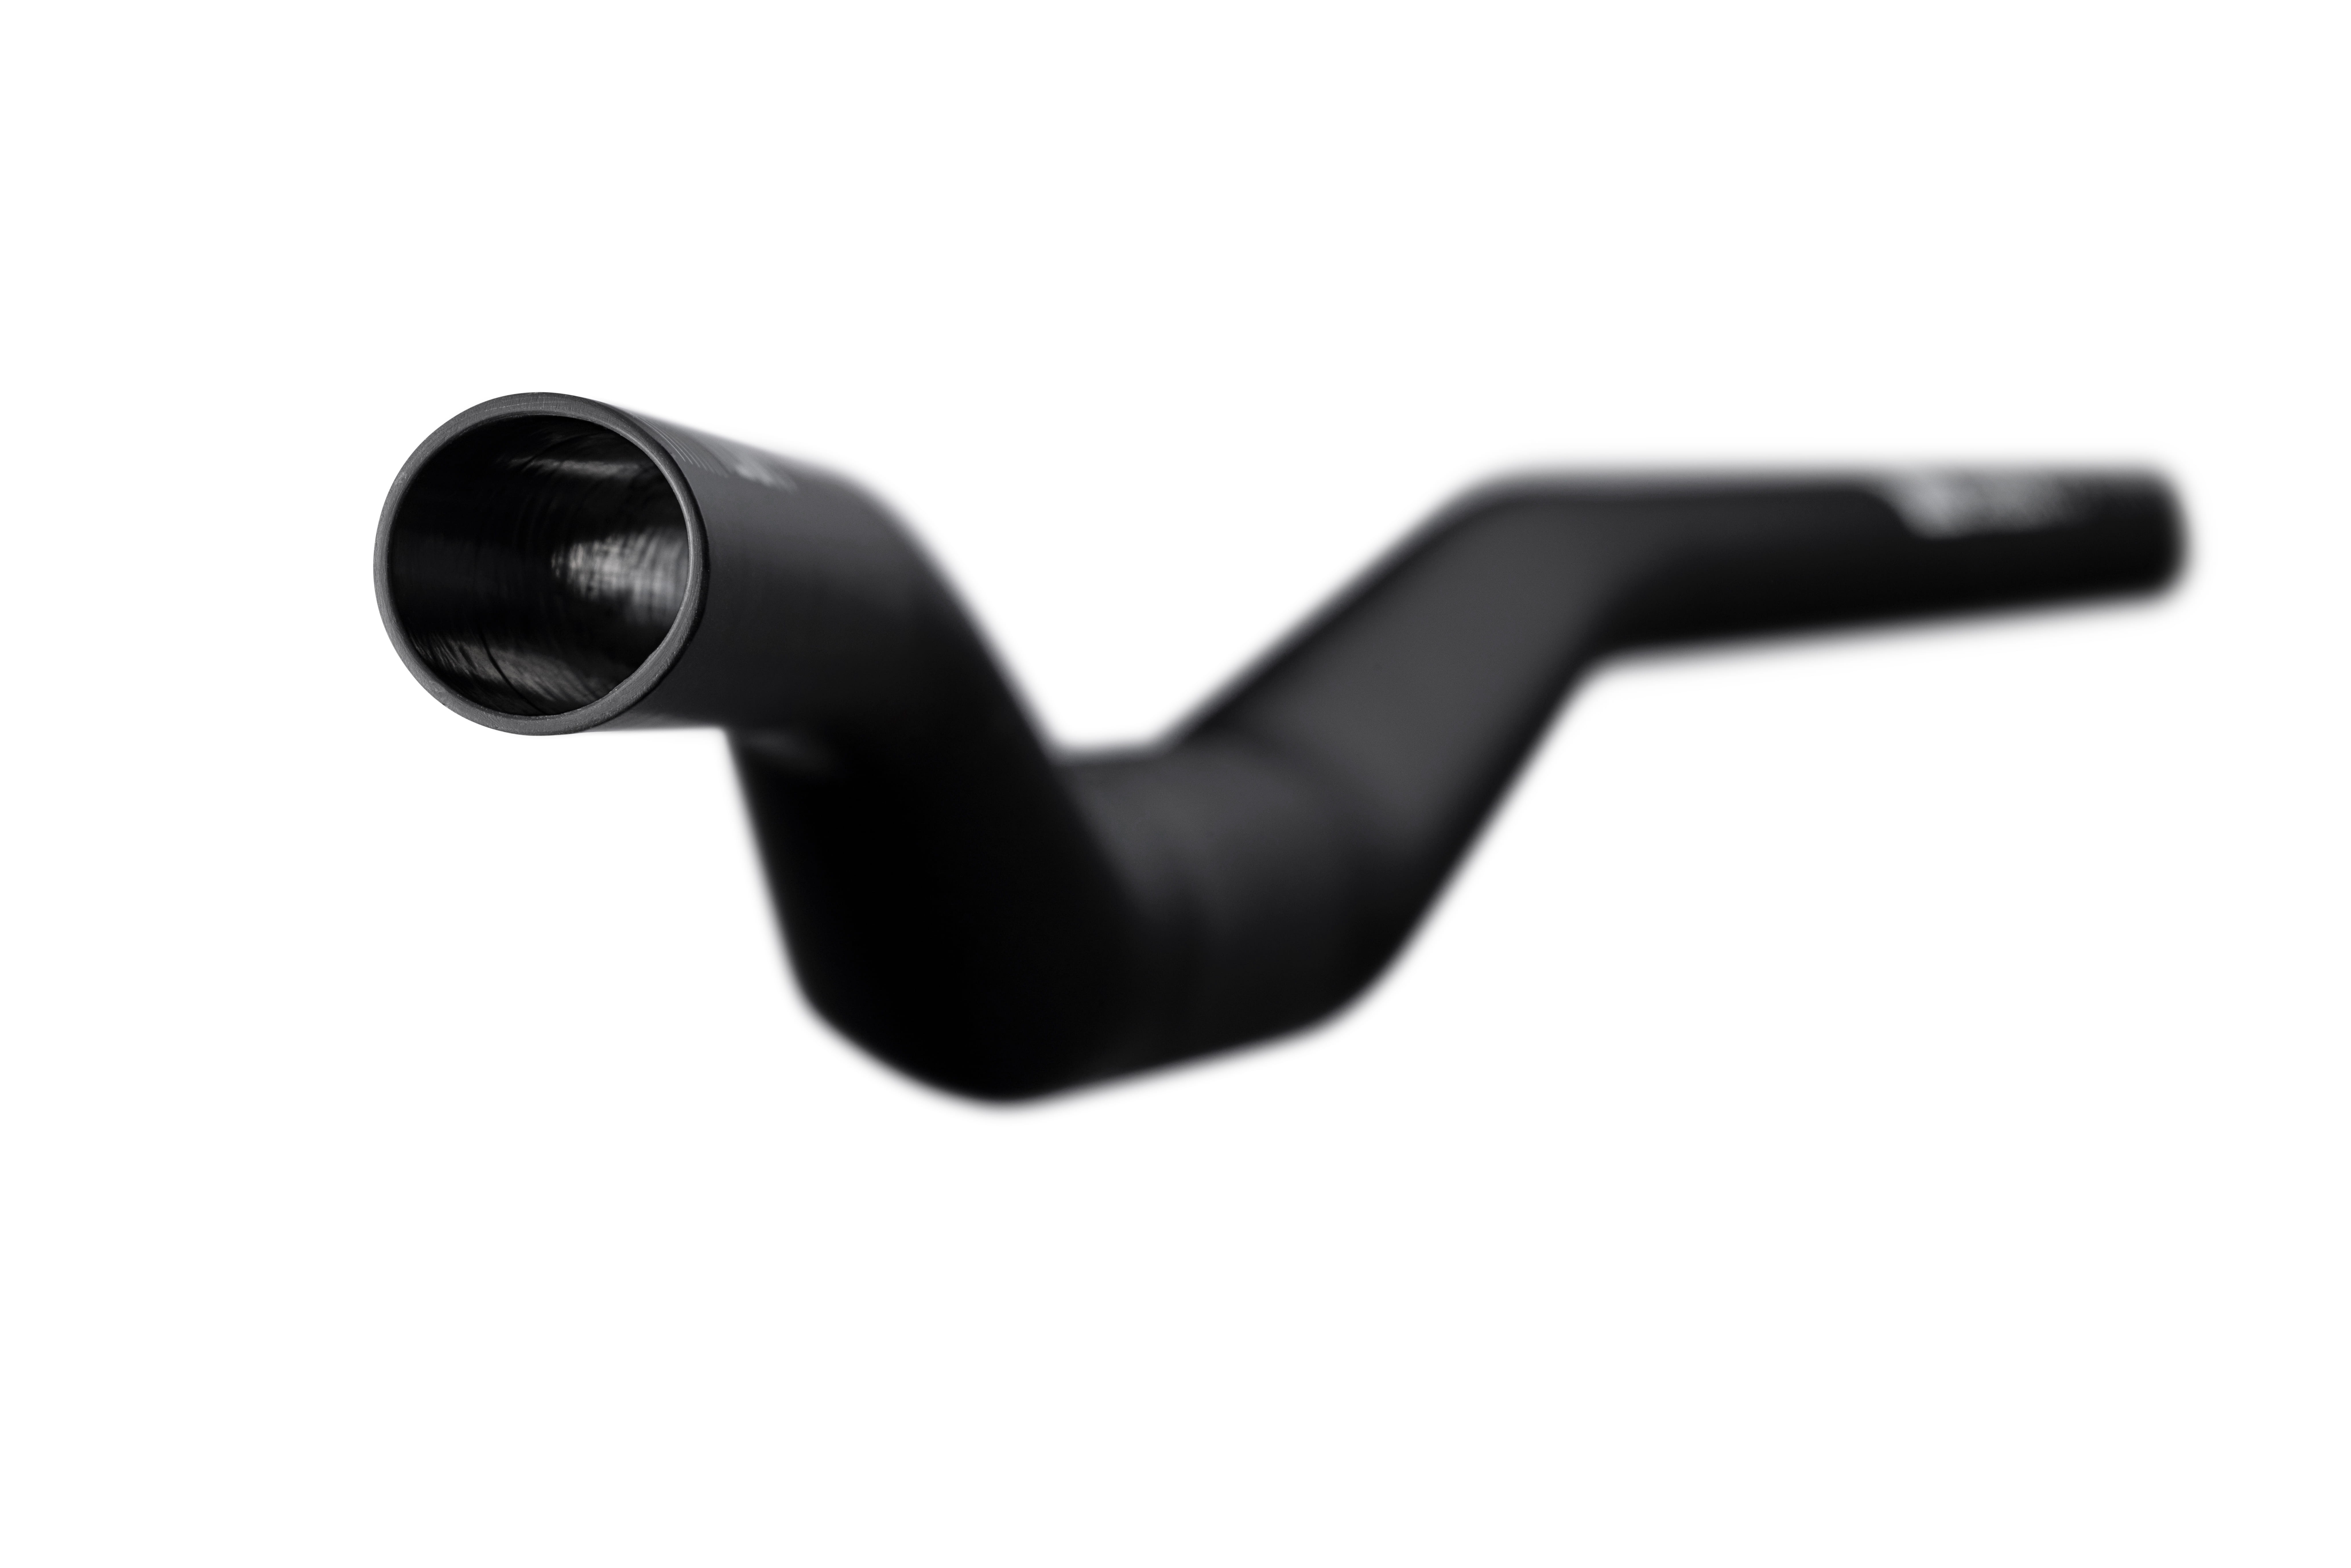 New Release: Title MTB Carbon and Alloy Reform Handlebars